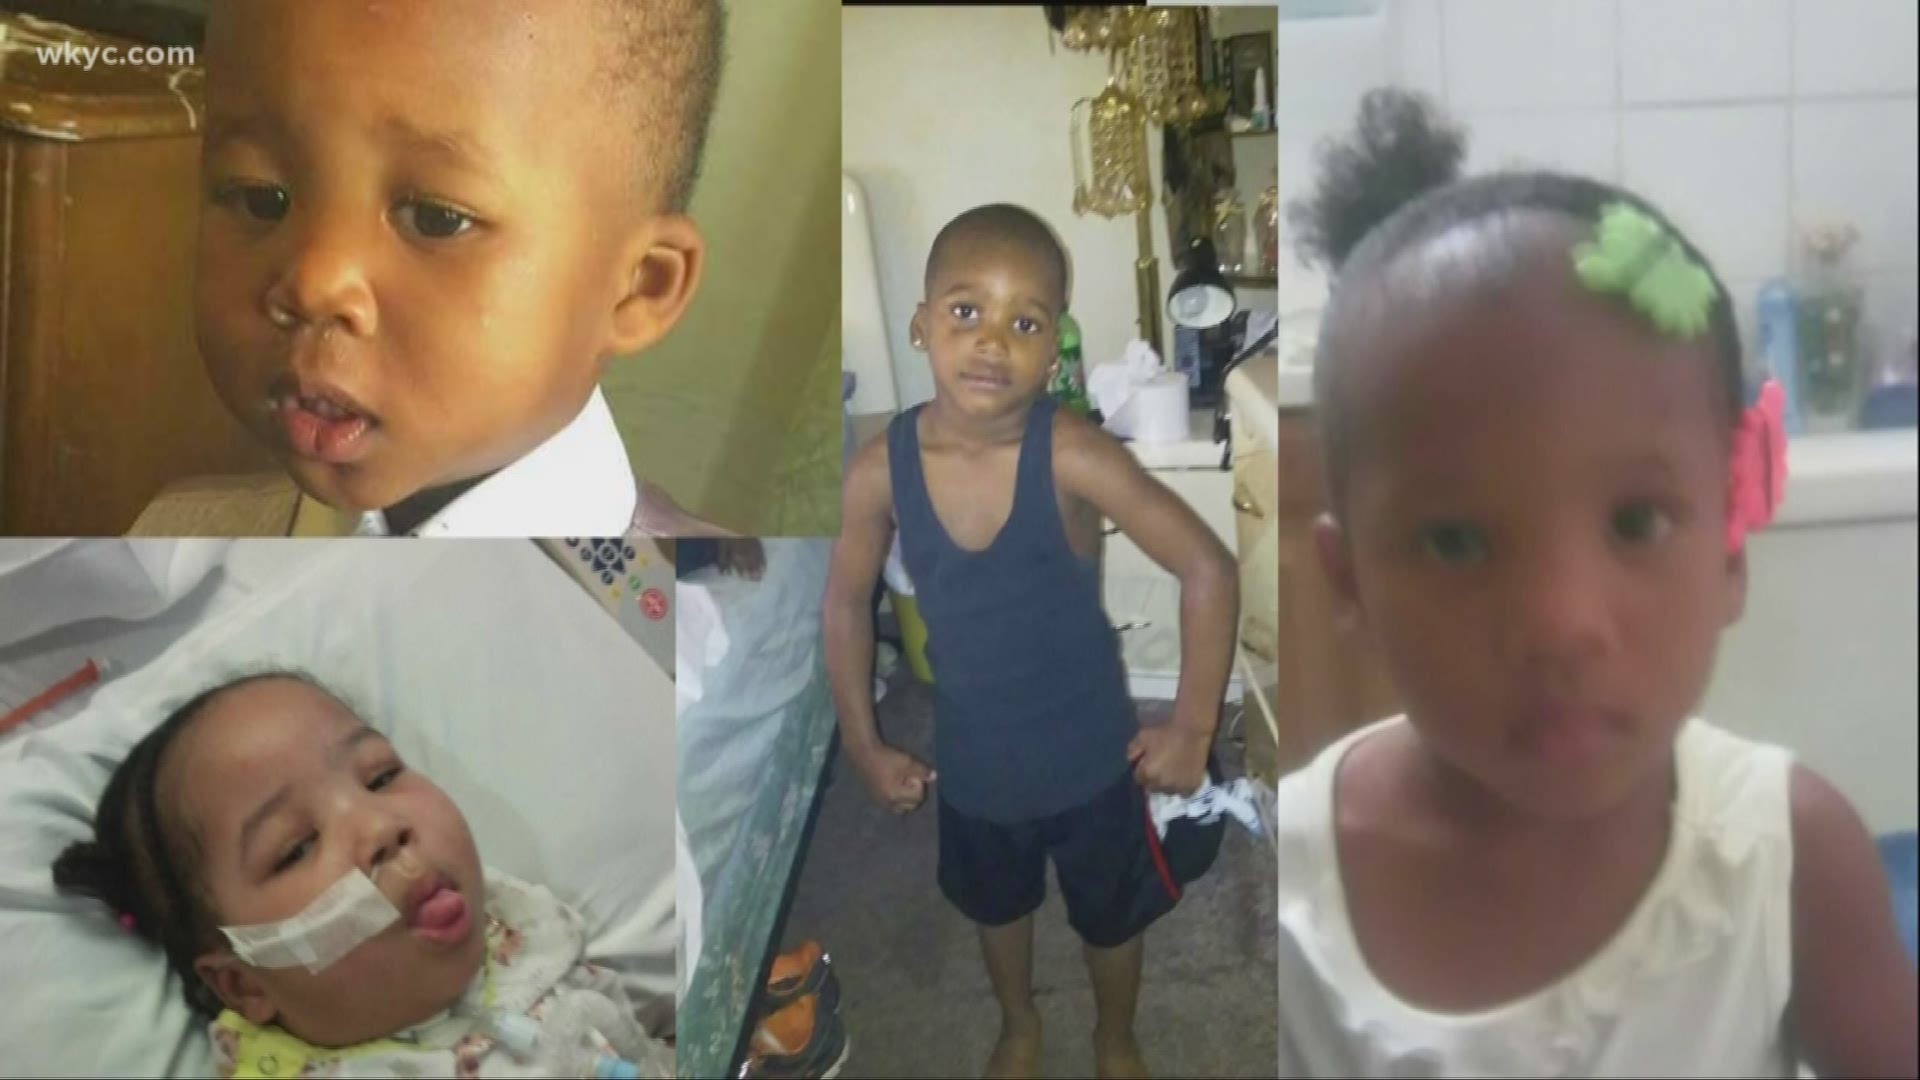 4 children abducted by mother in Cleveland safely located